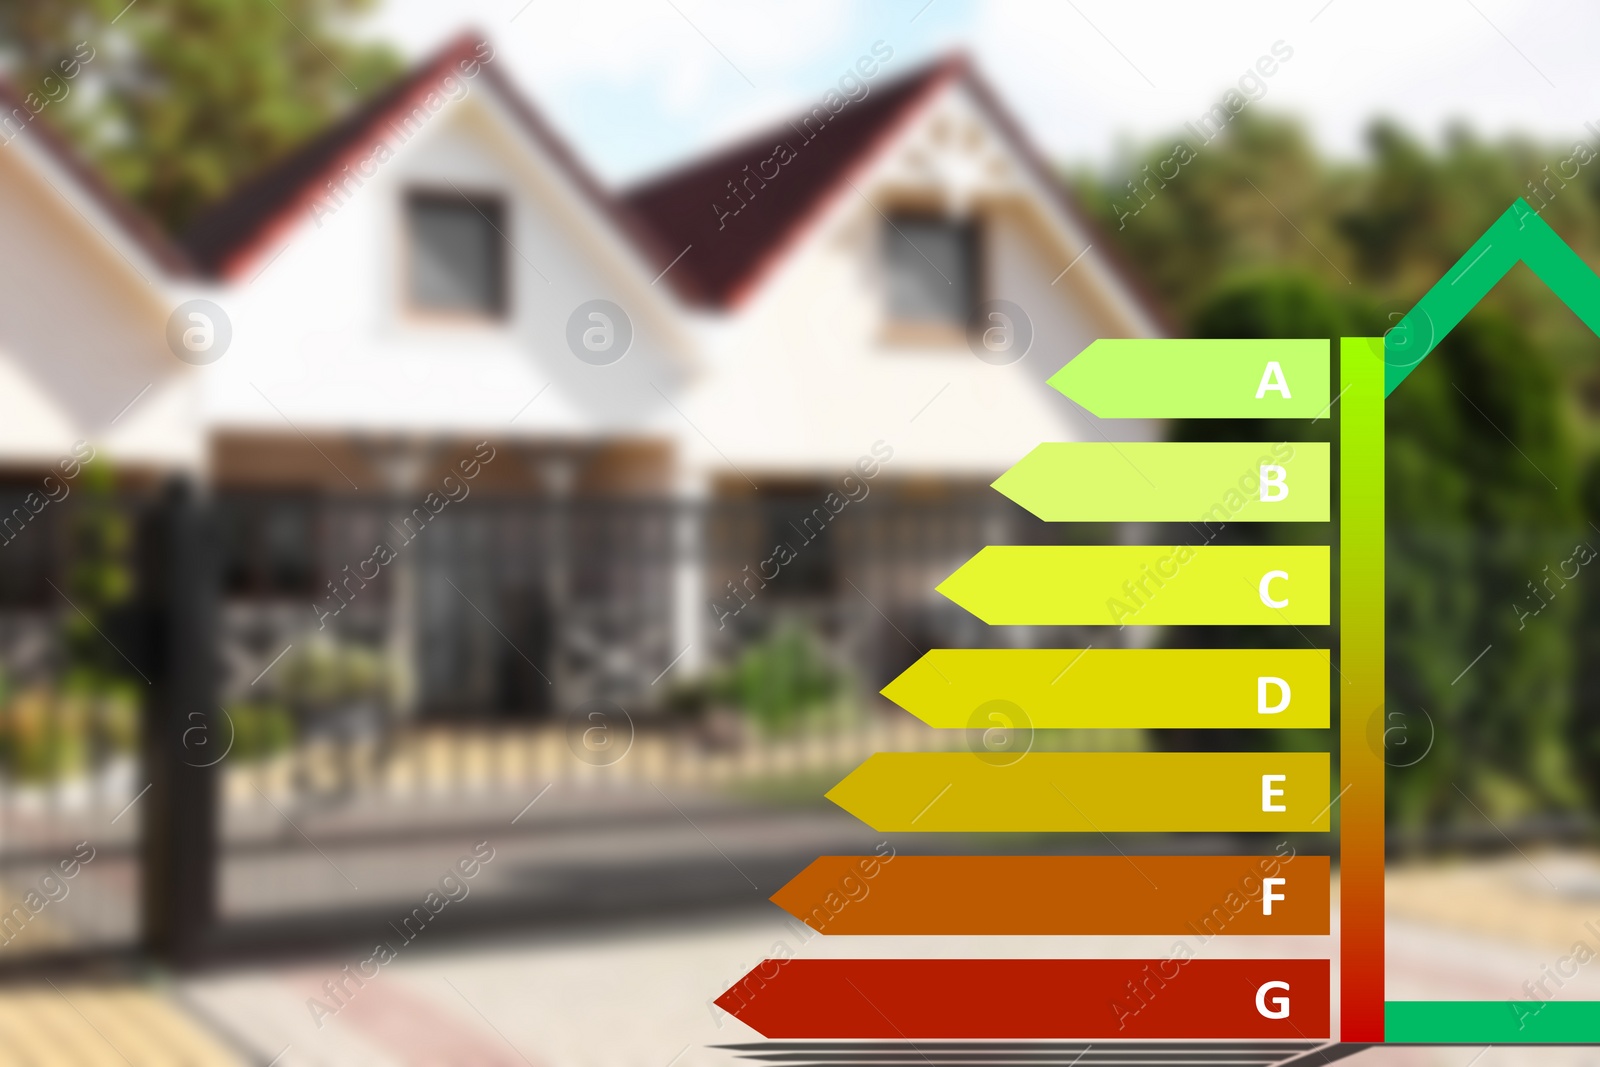 Image of Energy efficiency rating and blurred view of houses outdoors